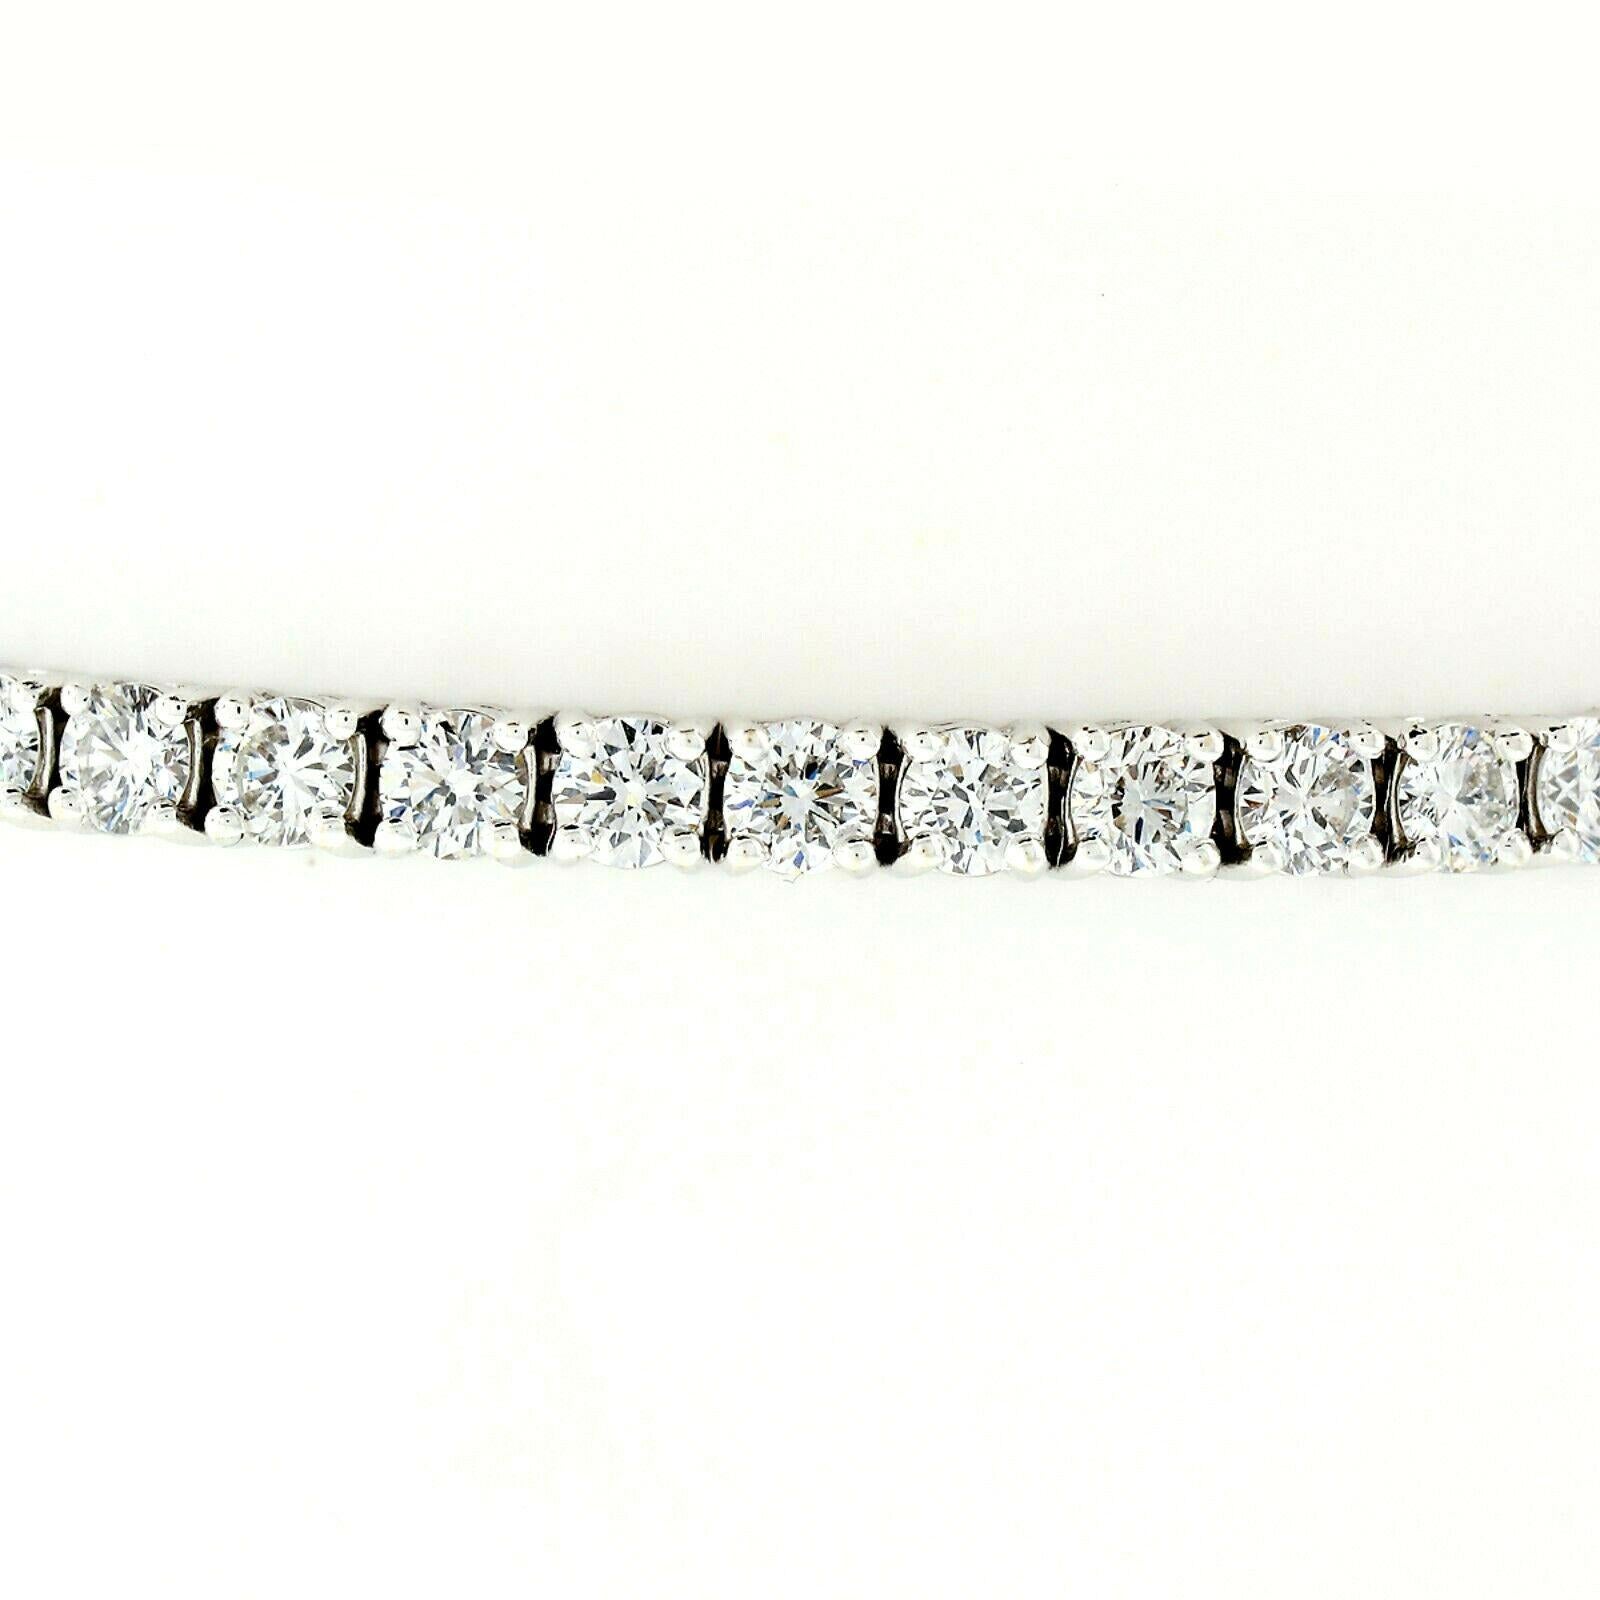 This stunning, classic diamond line tennis bracelet is newly crafted in solid 18k white gold and set with 45 very fine quality round brilliant cut diamonds throughout. Each diamond individually sits in a fine and sturdy 4-prong basket setting. The